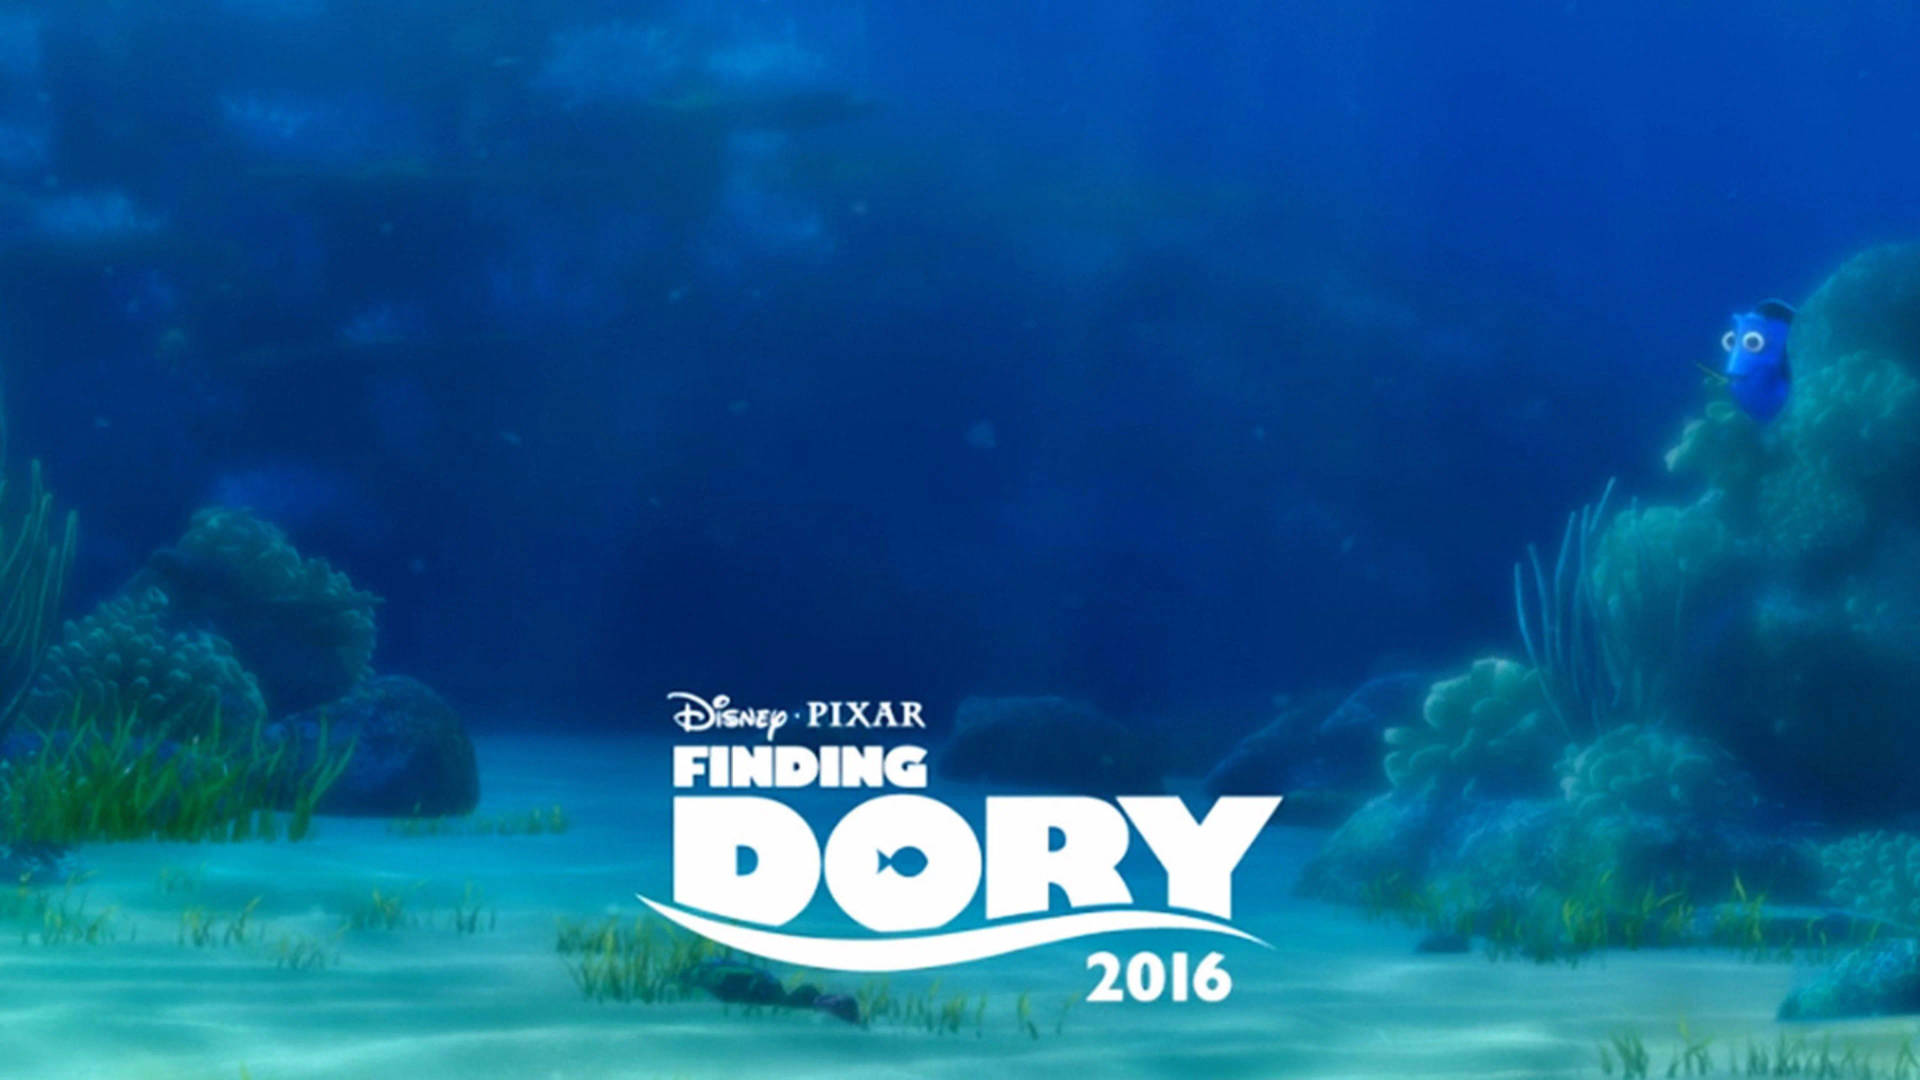 Finding Dory 2016 Movie Wallpaper